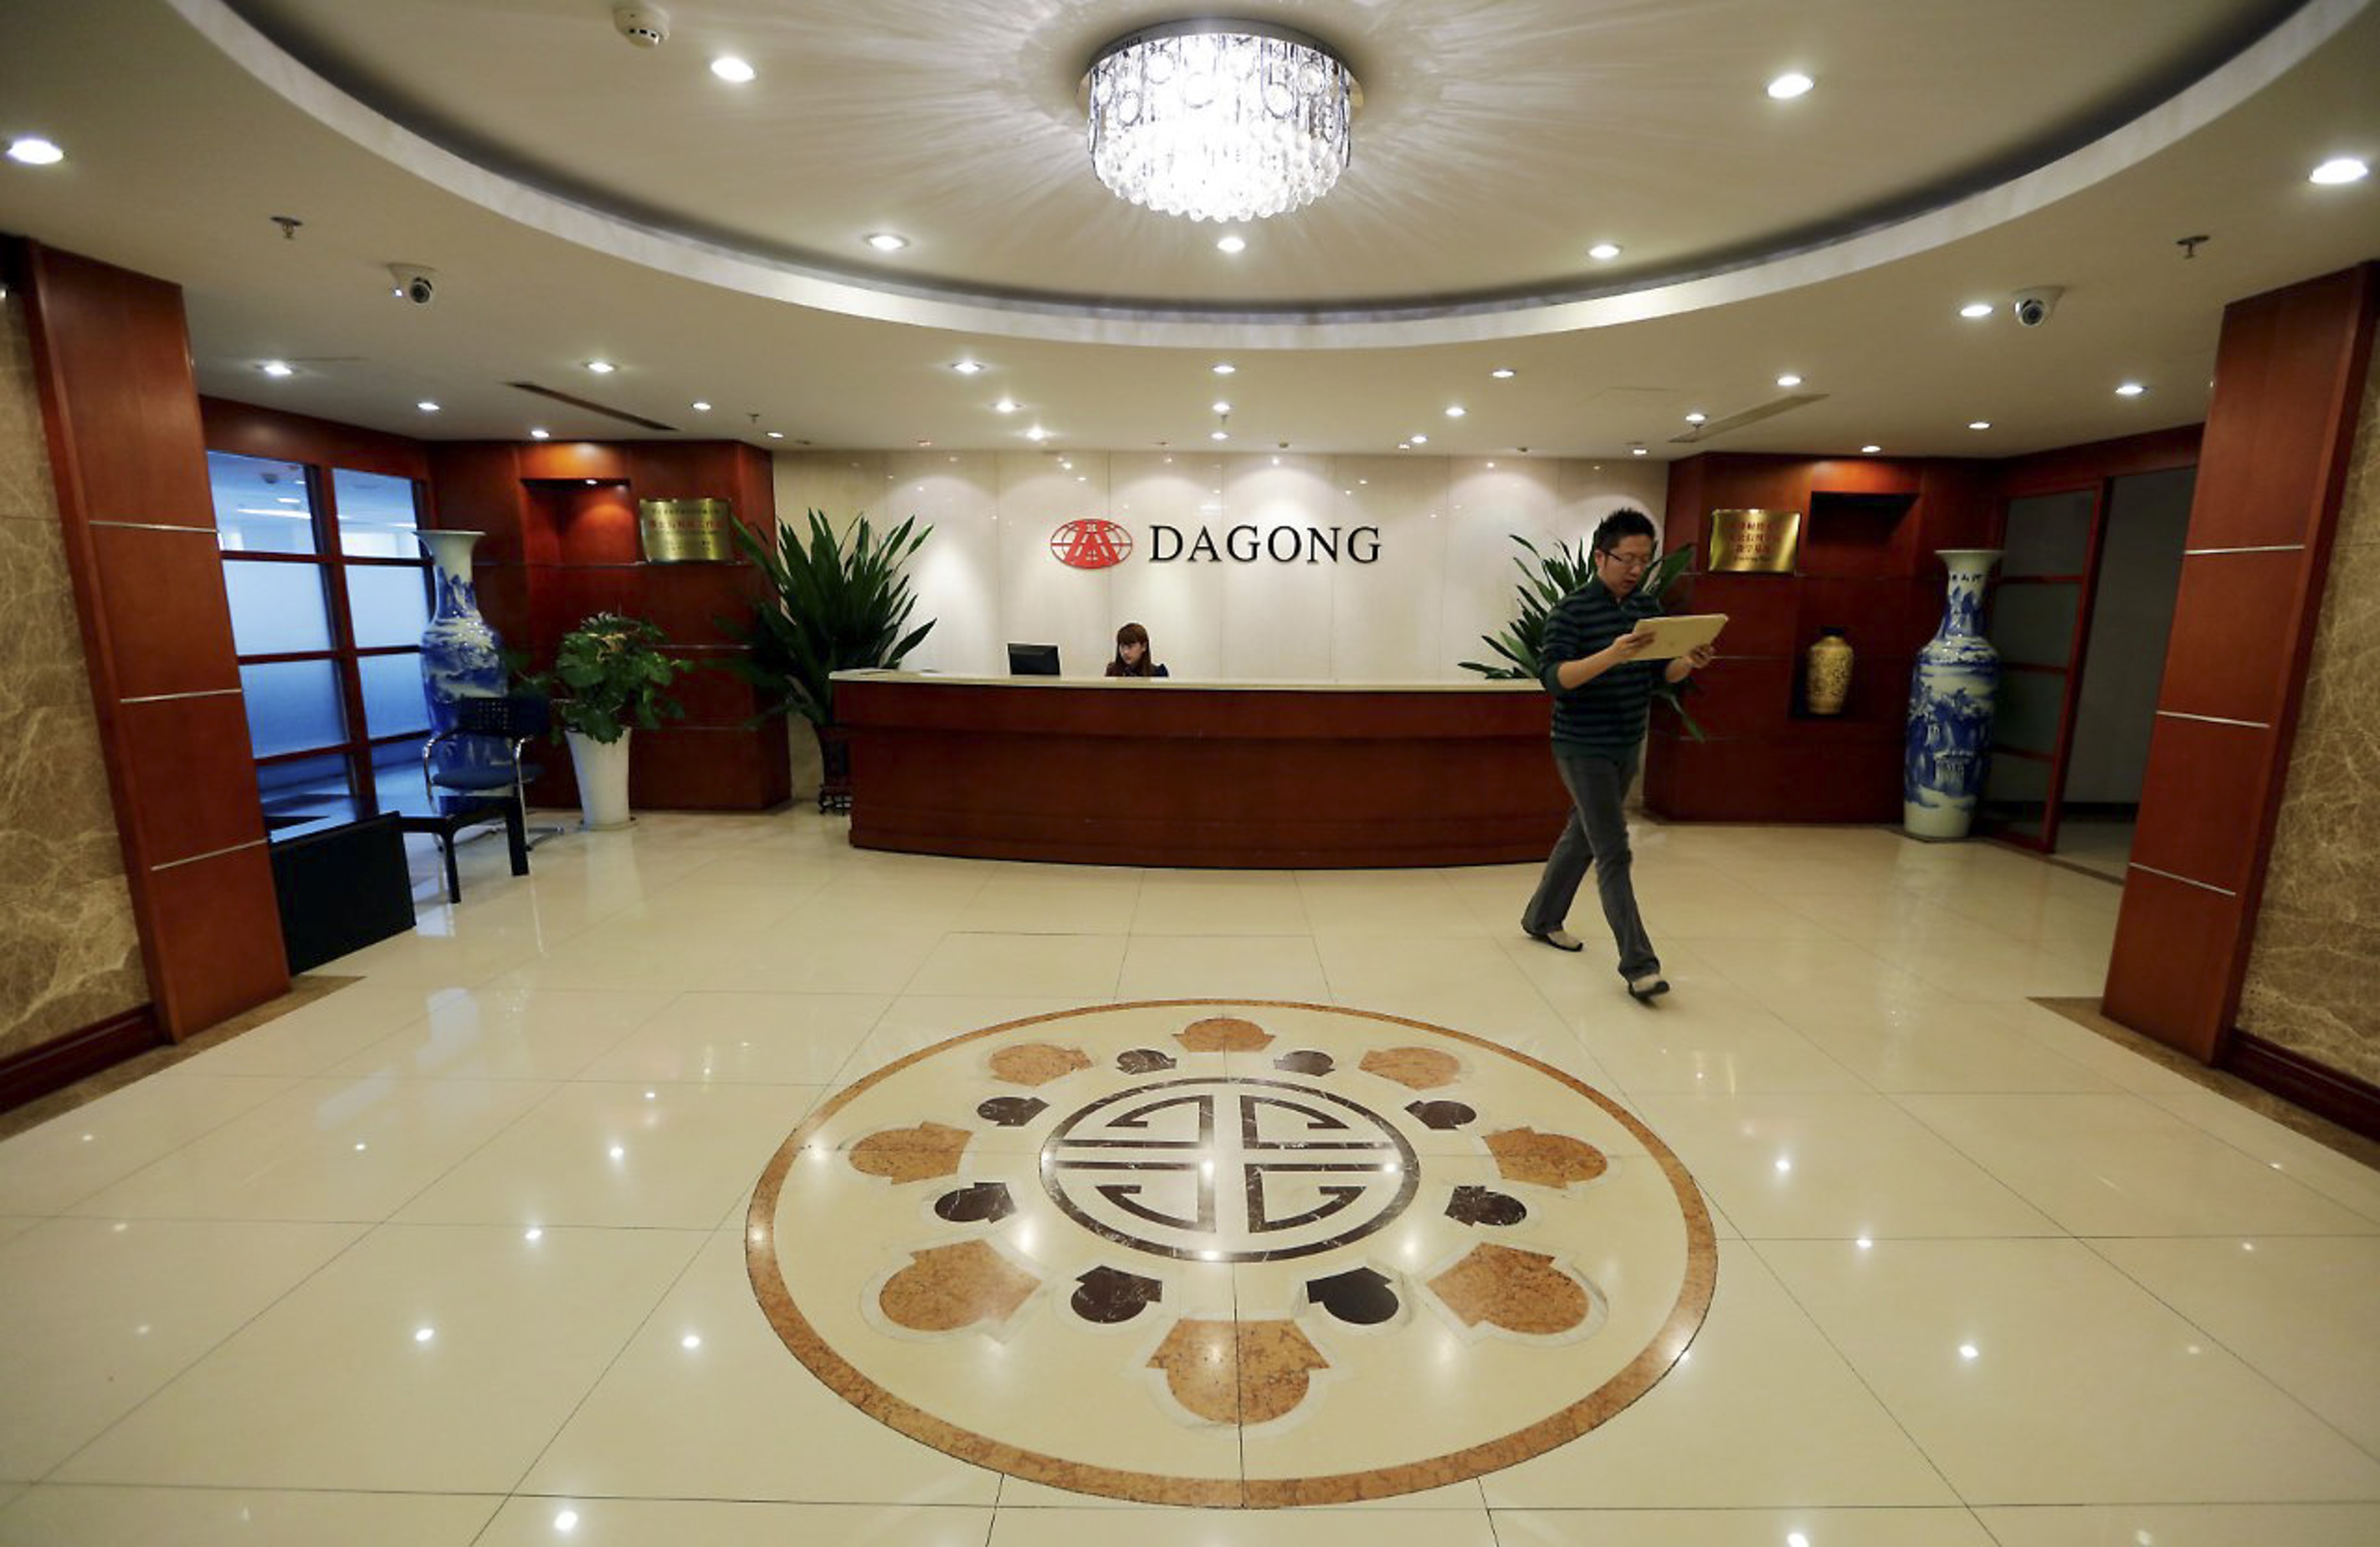 Dagong Global Credit Rating, established in 1994, is one of China’s big four credit rating agencies. Photo: Reuters